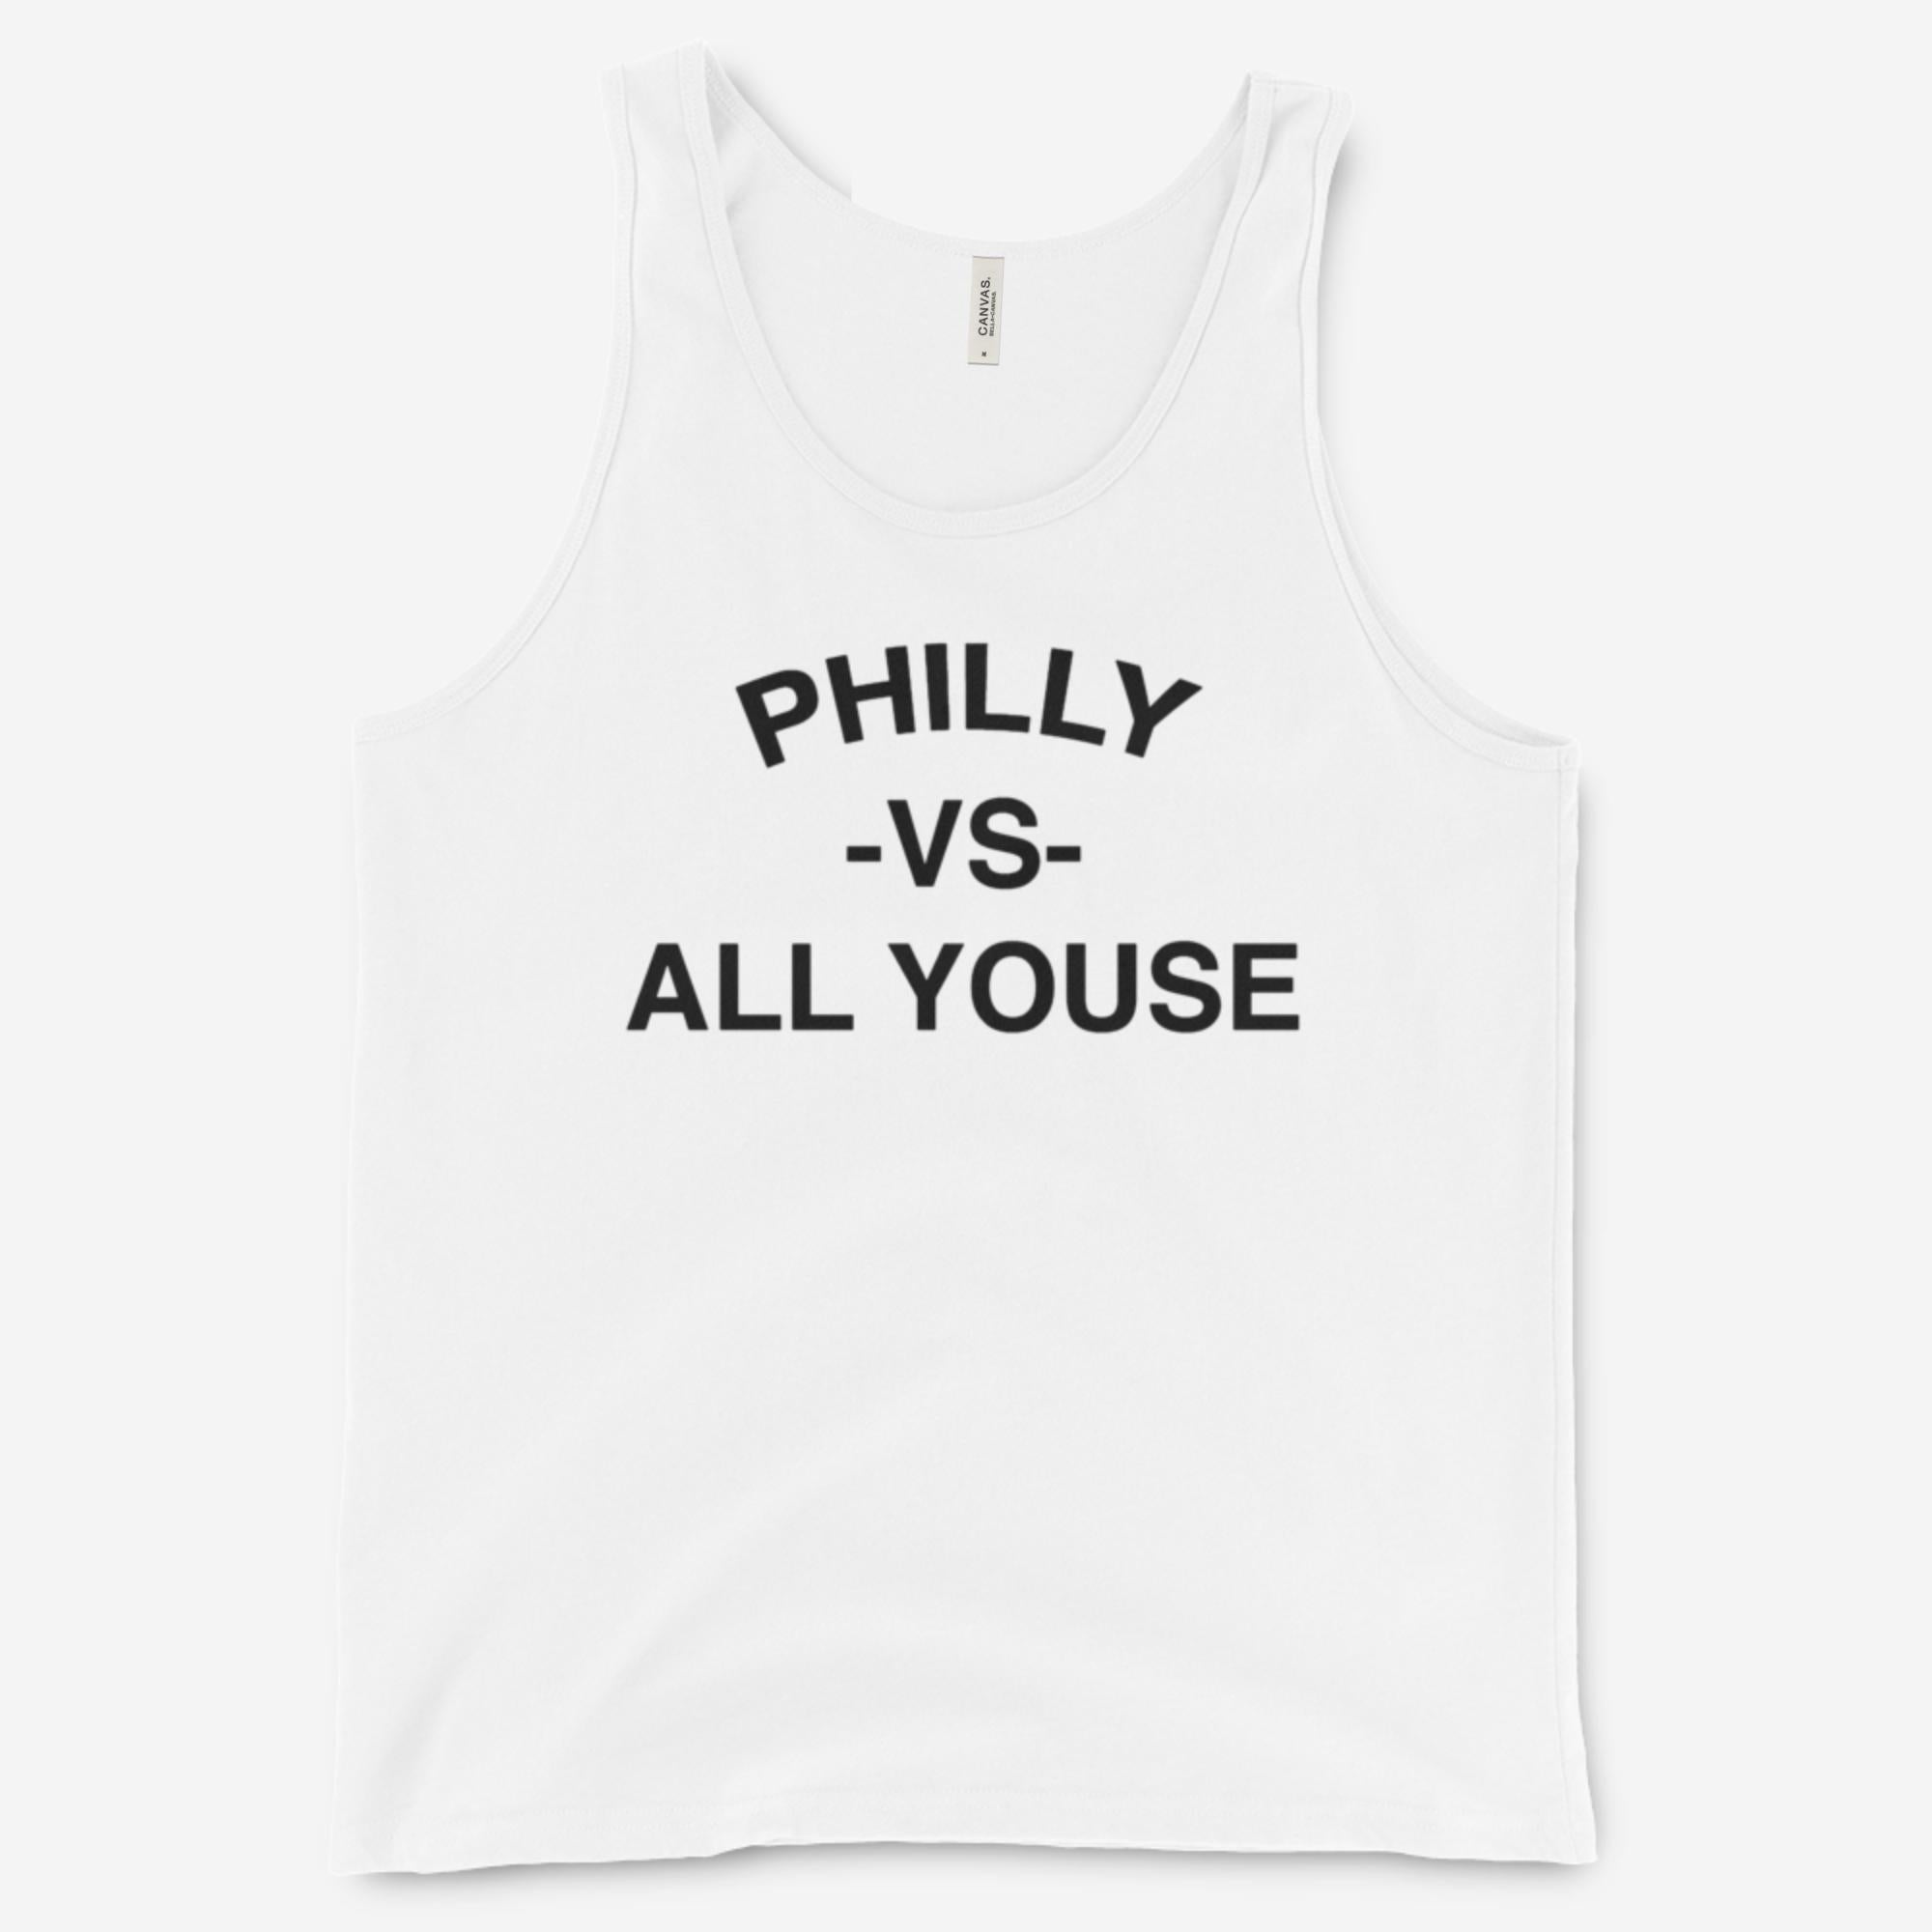 "Philly vs All Youse" Tank Top